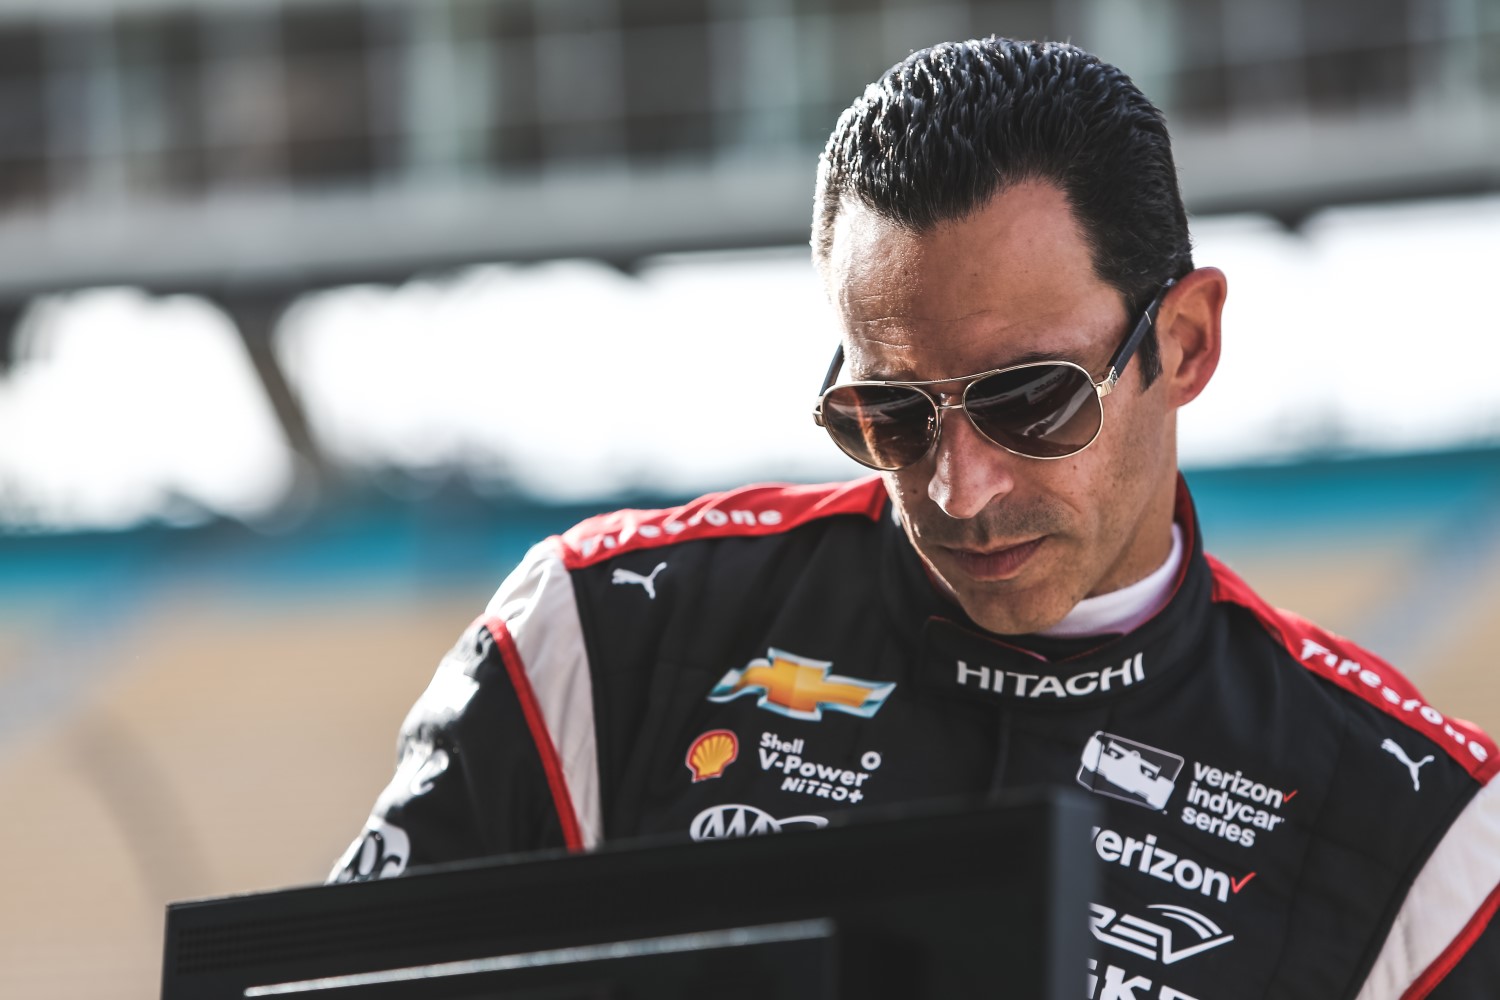 Chevy likely saved Castroneves' IndyCar ride